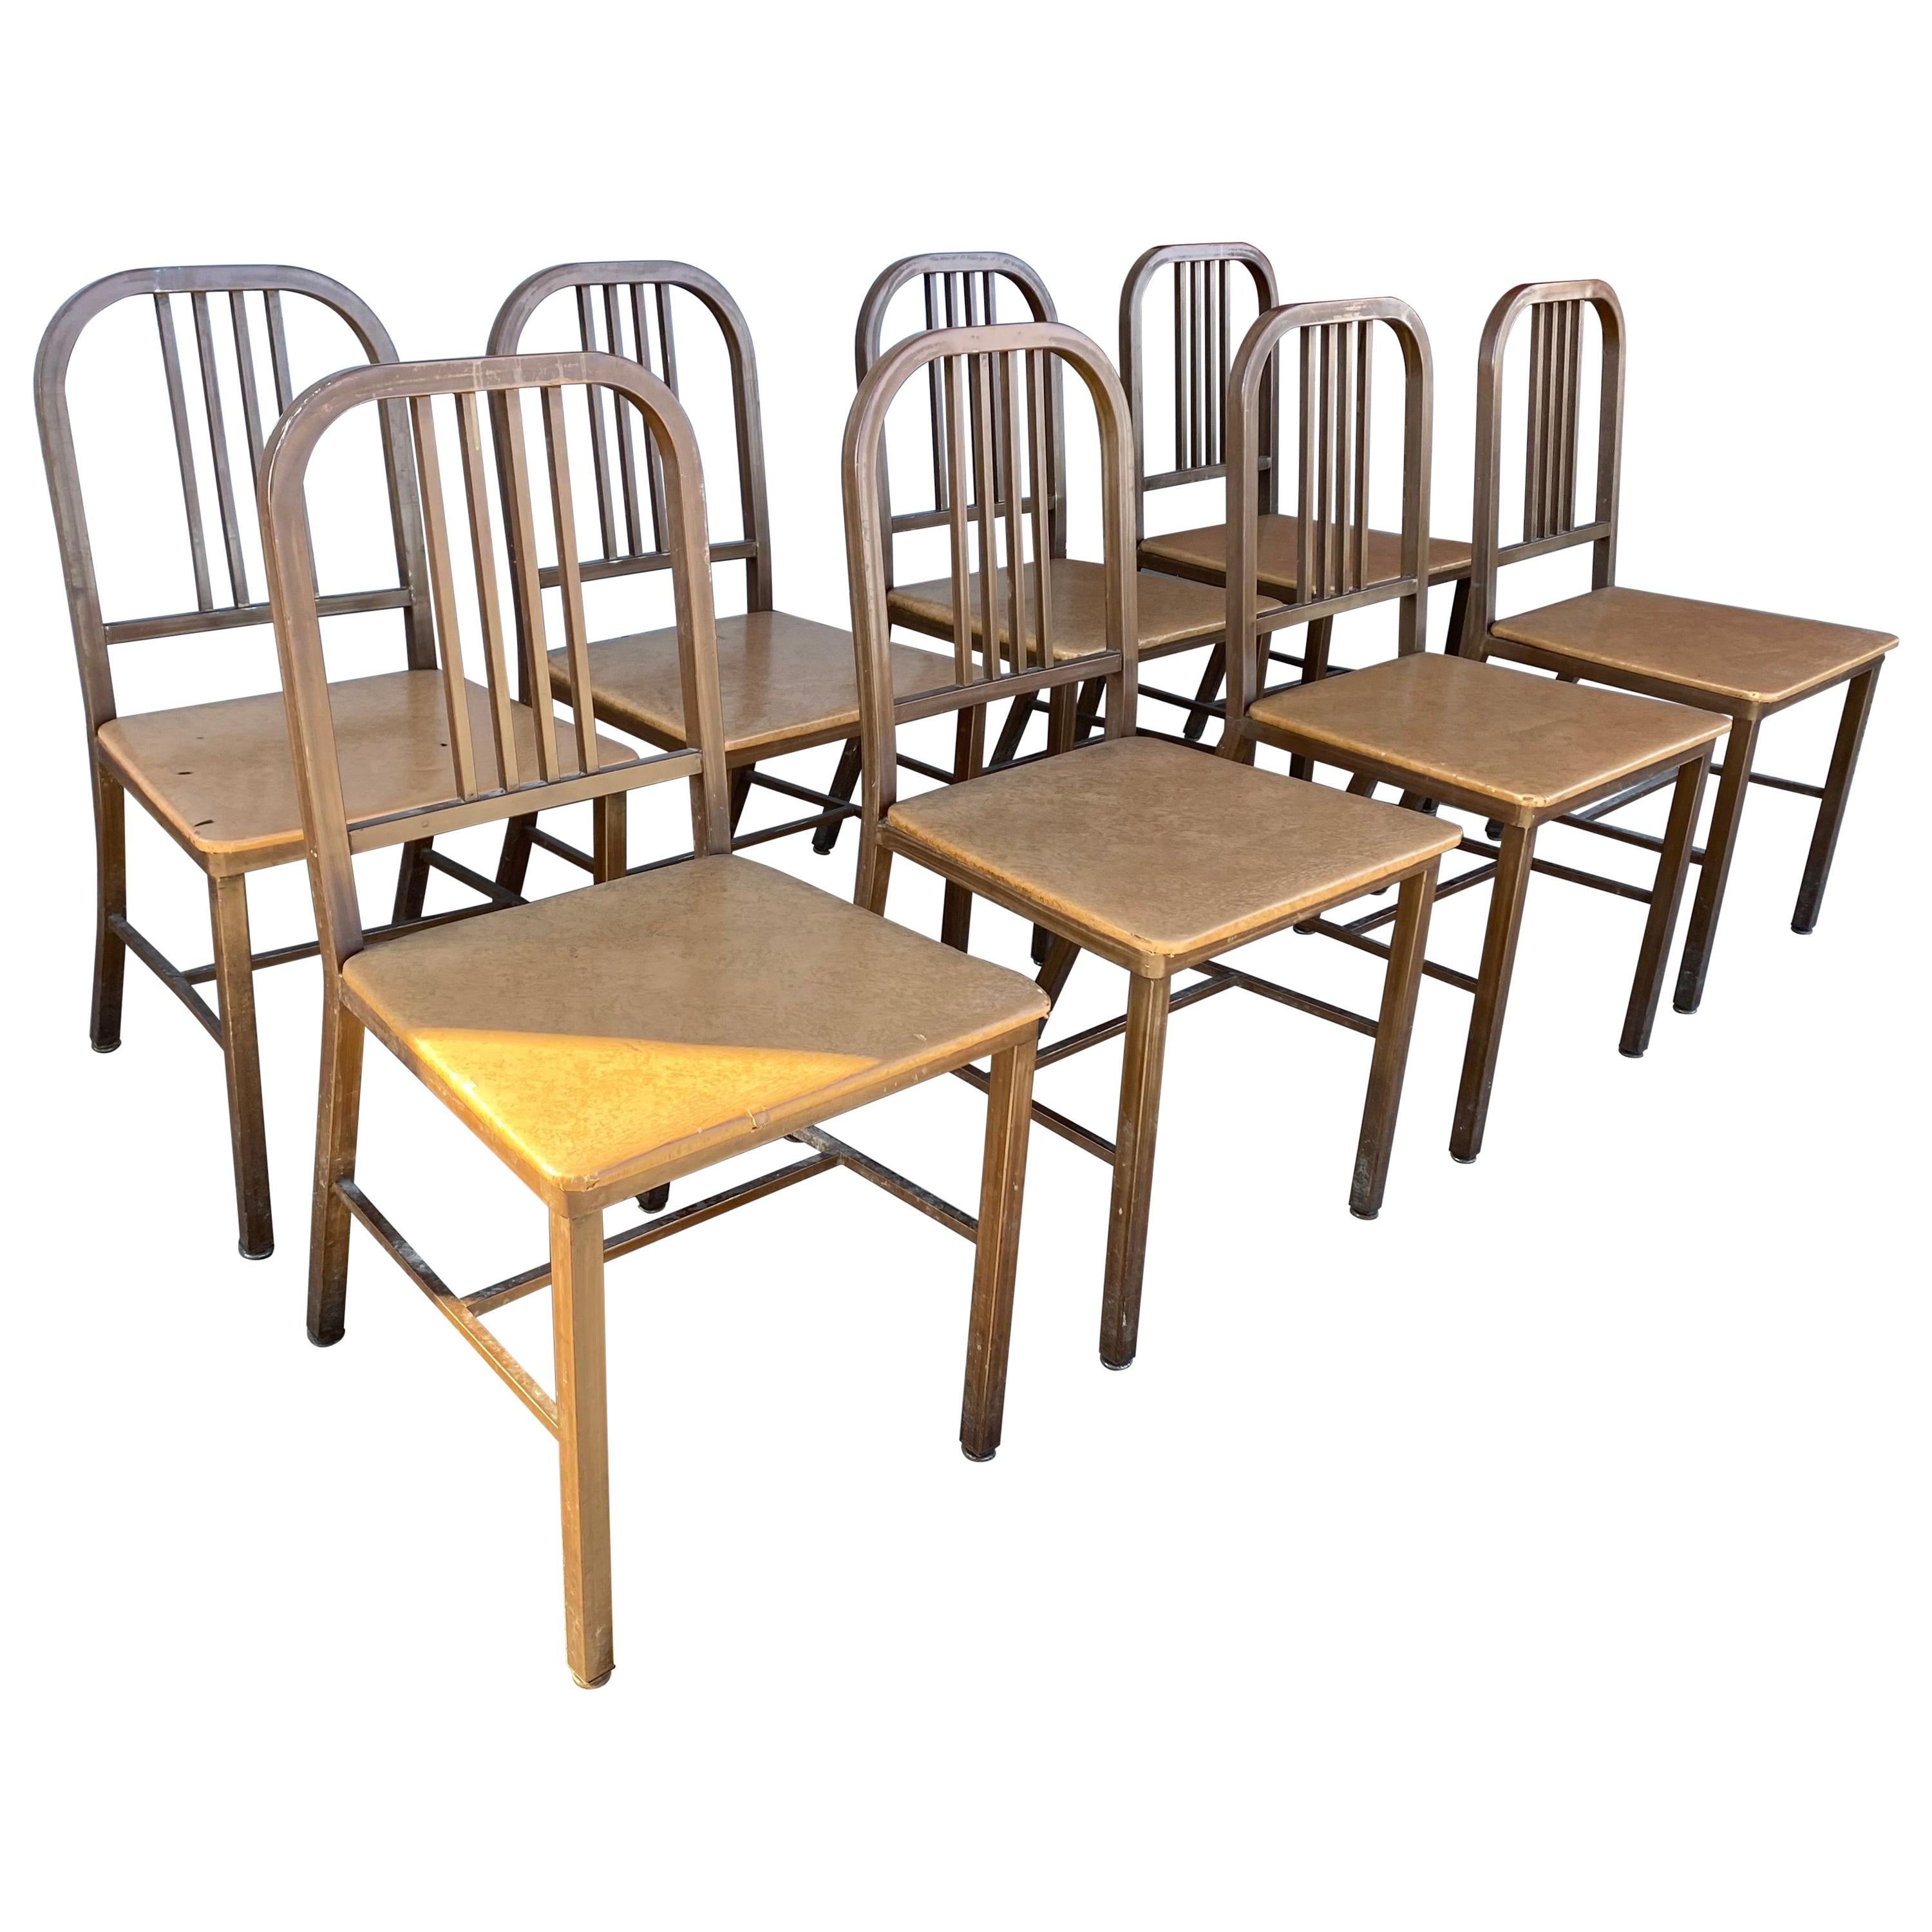 Set of 8 Classic Industrial Metal Side Chairs Made by HARD MFG CO For Sale